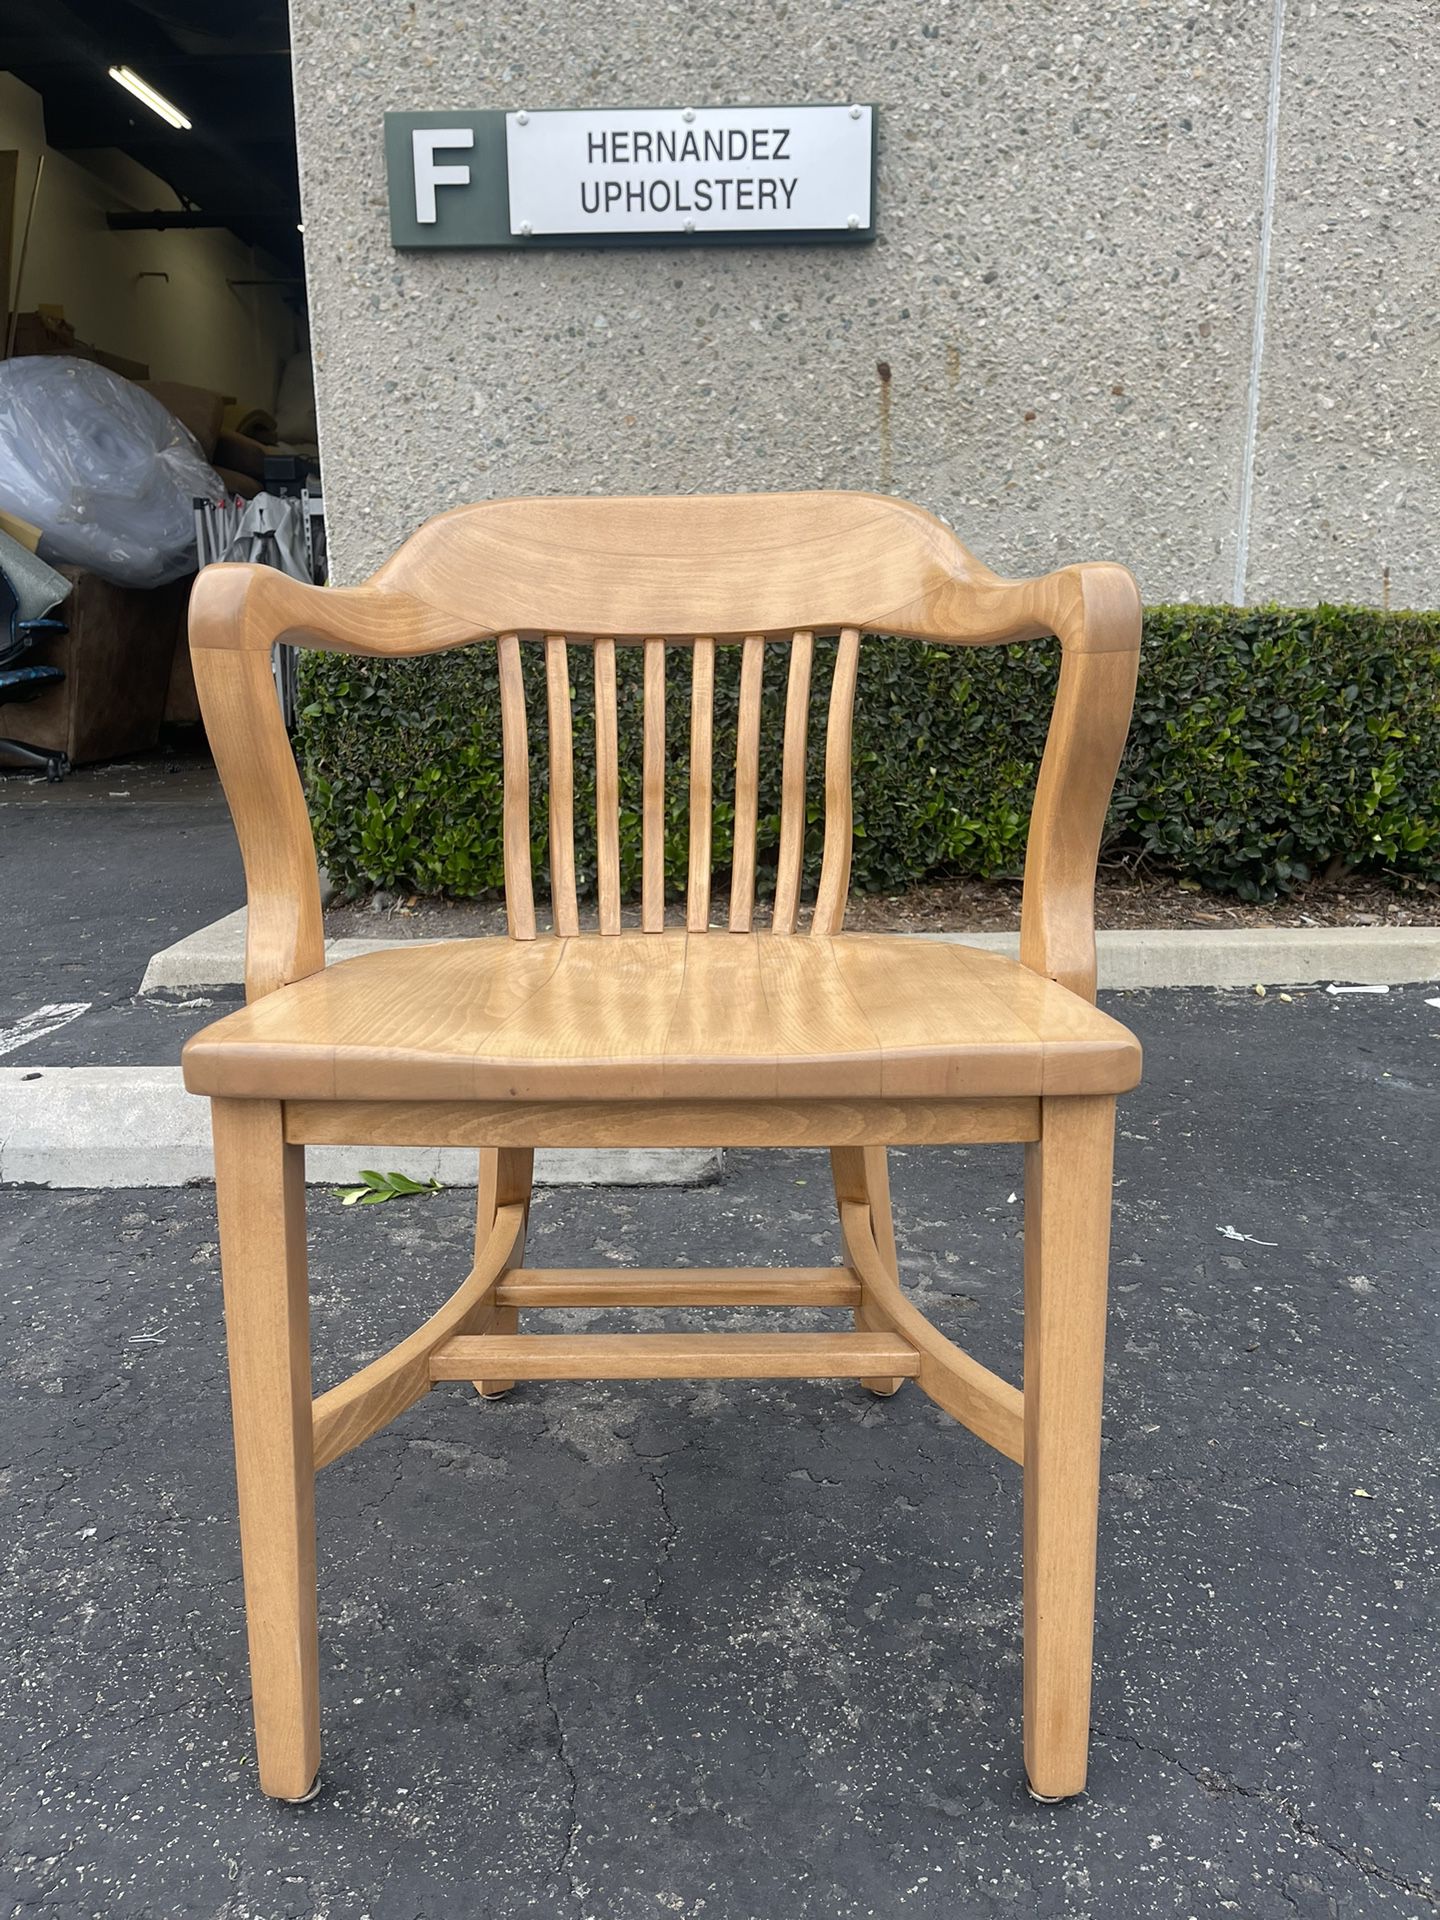 Good Quality Wooden Chairs $180 Each